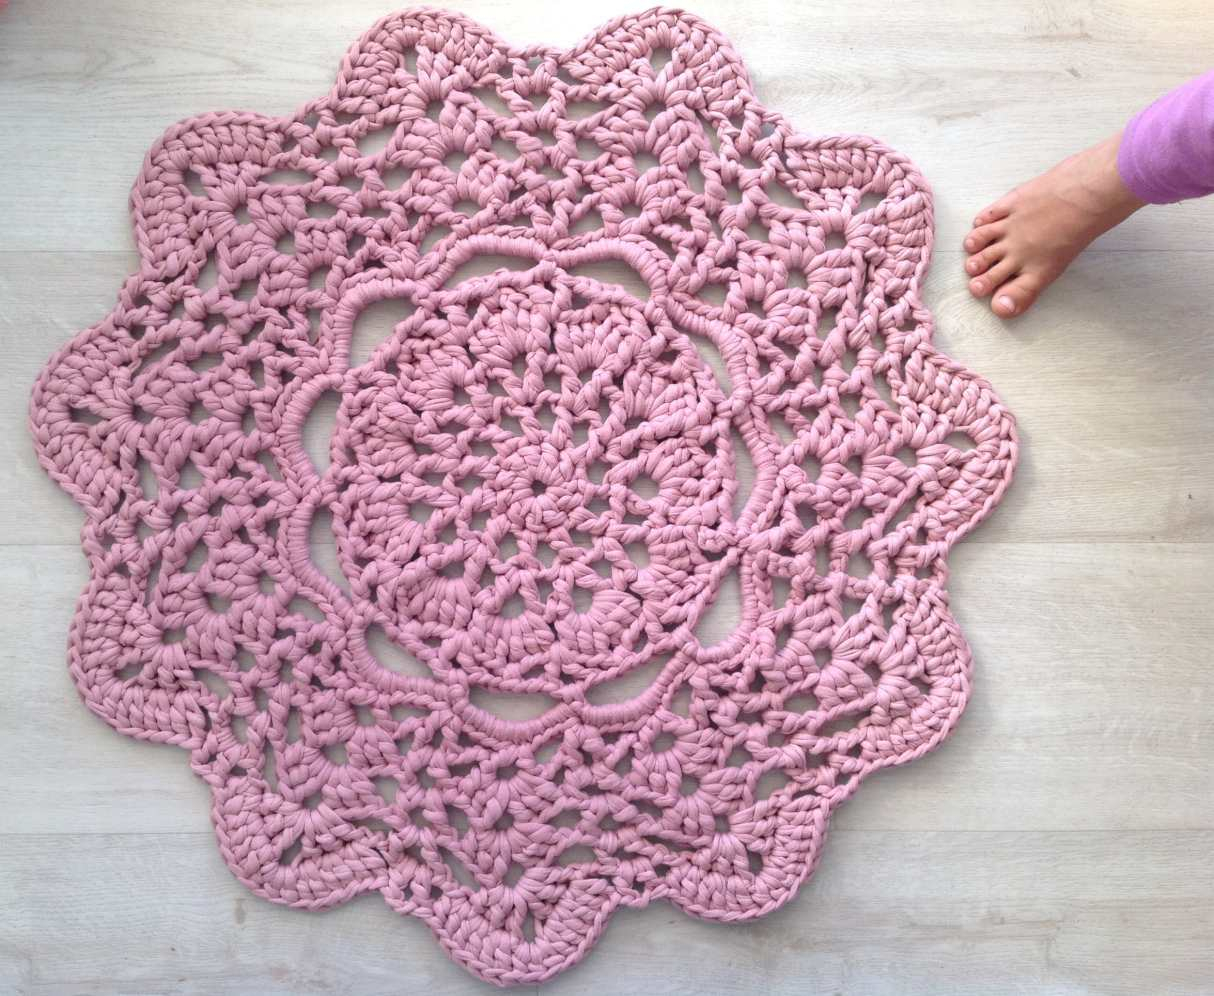 Free Crochet Doily Patterns 10 Free Thread And Lace Crochet Doily Patterns